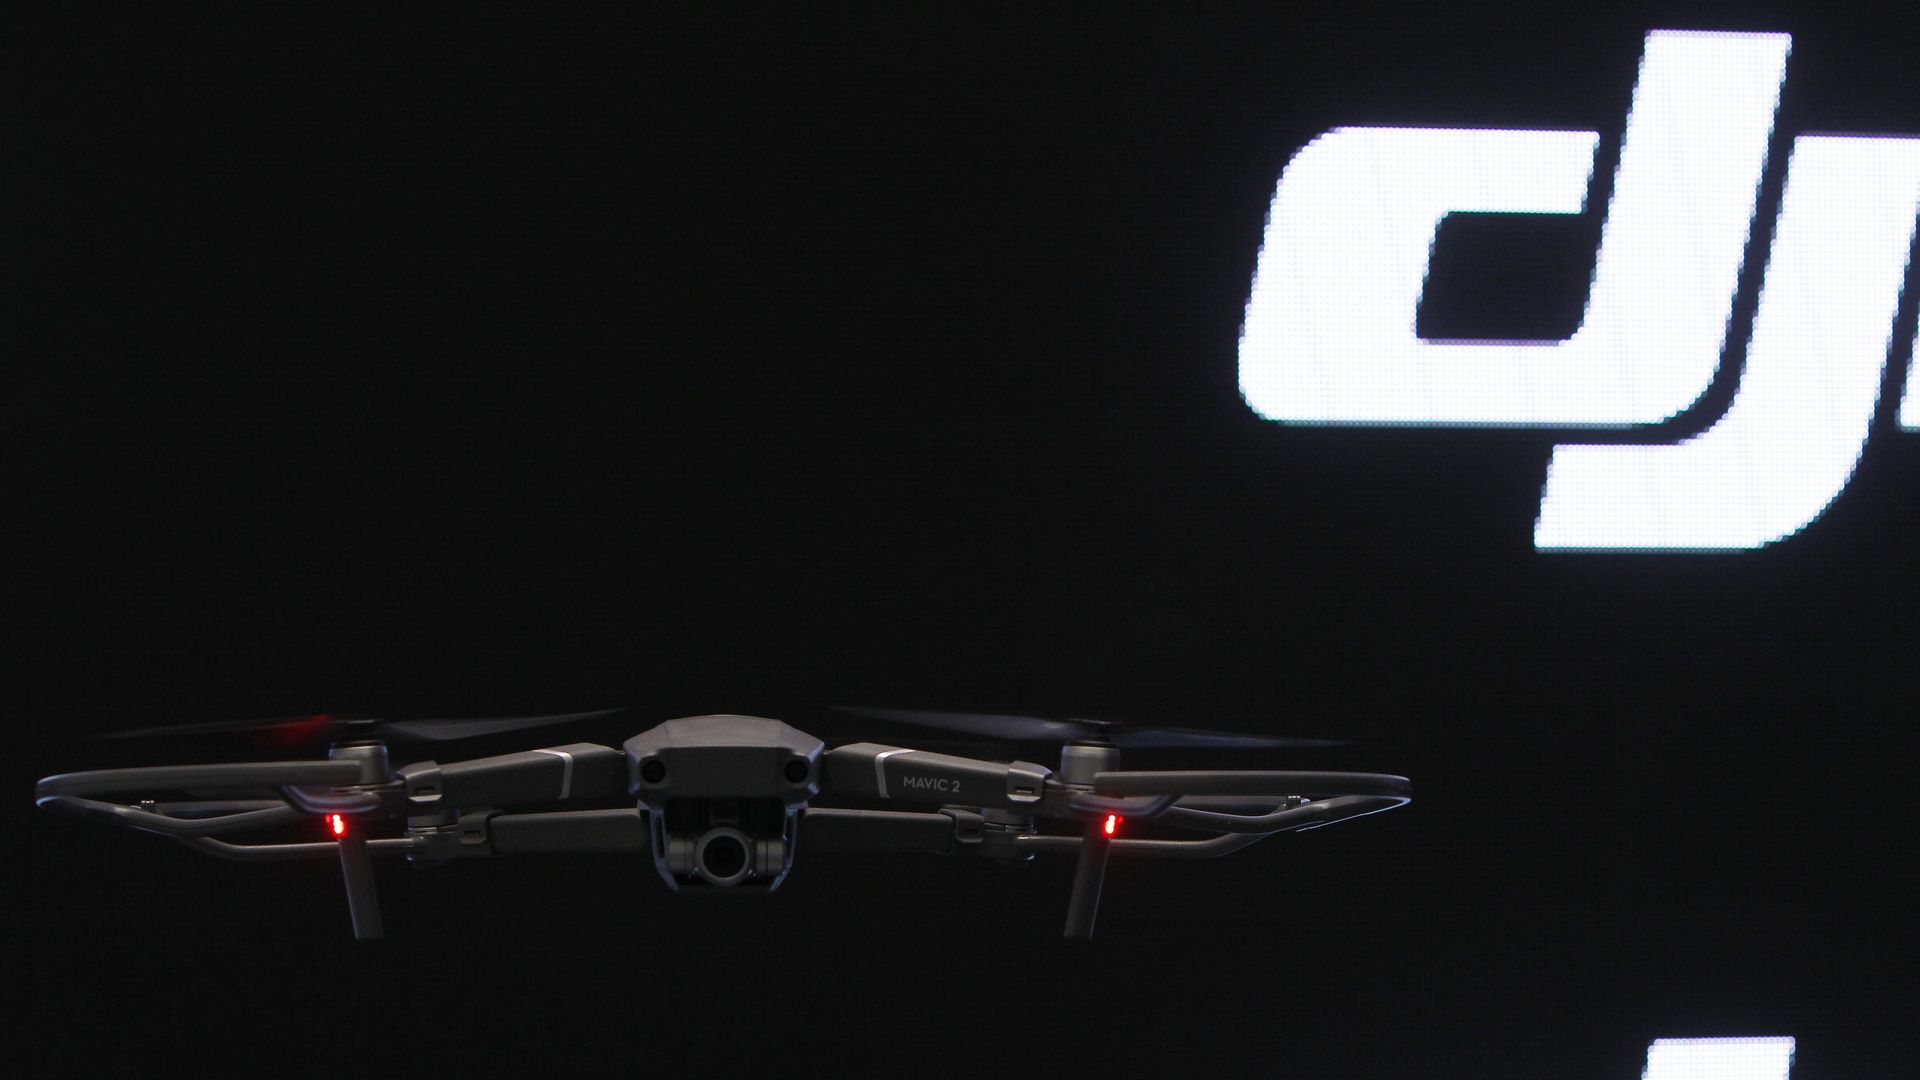 A DJI drone hovering in front of a background with the DJI logo